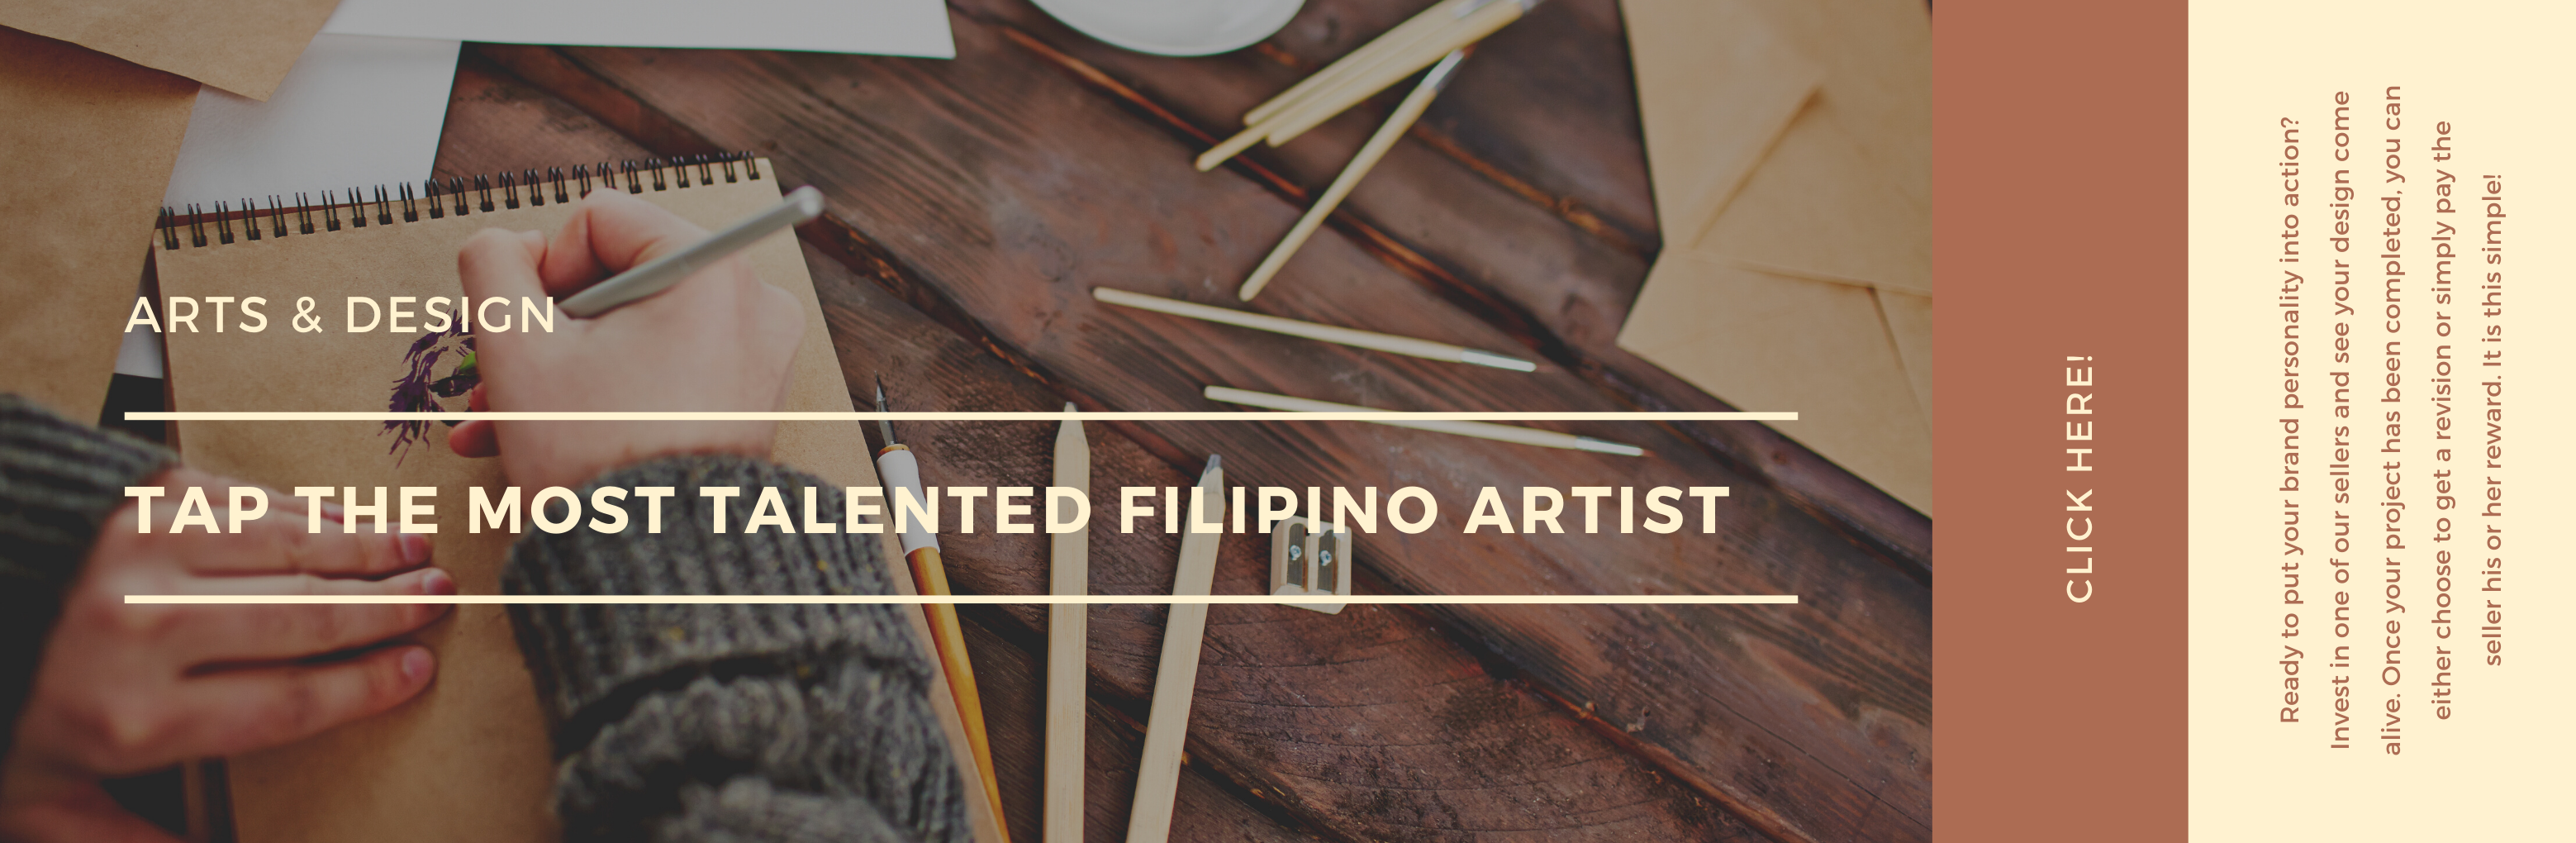 tap the most talented Filipino artist.png